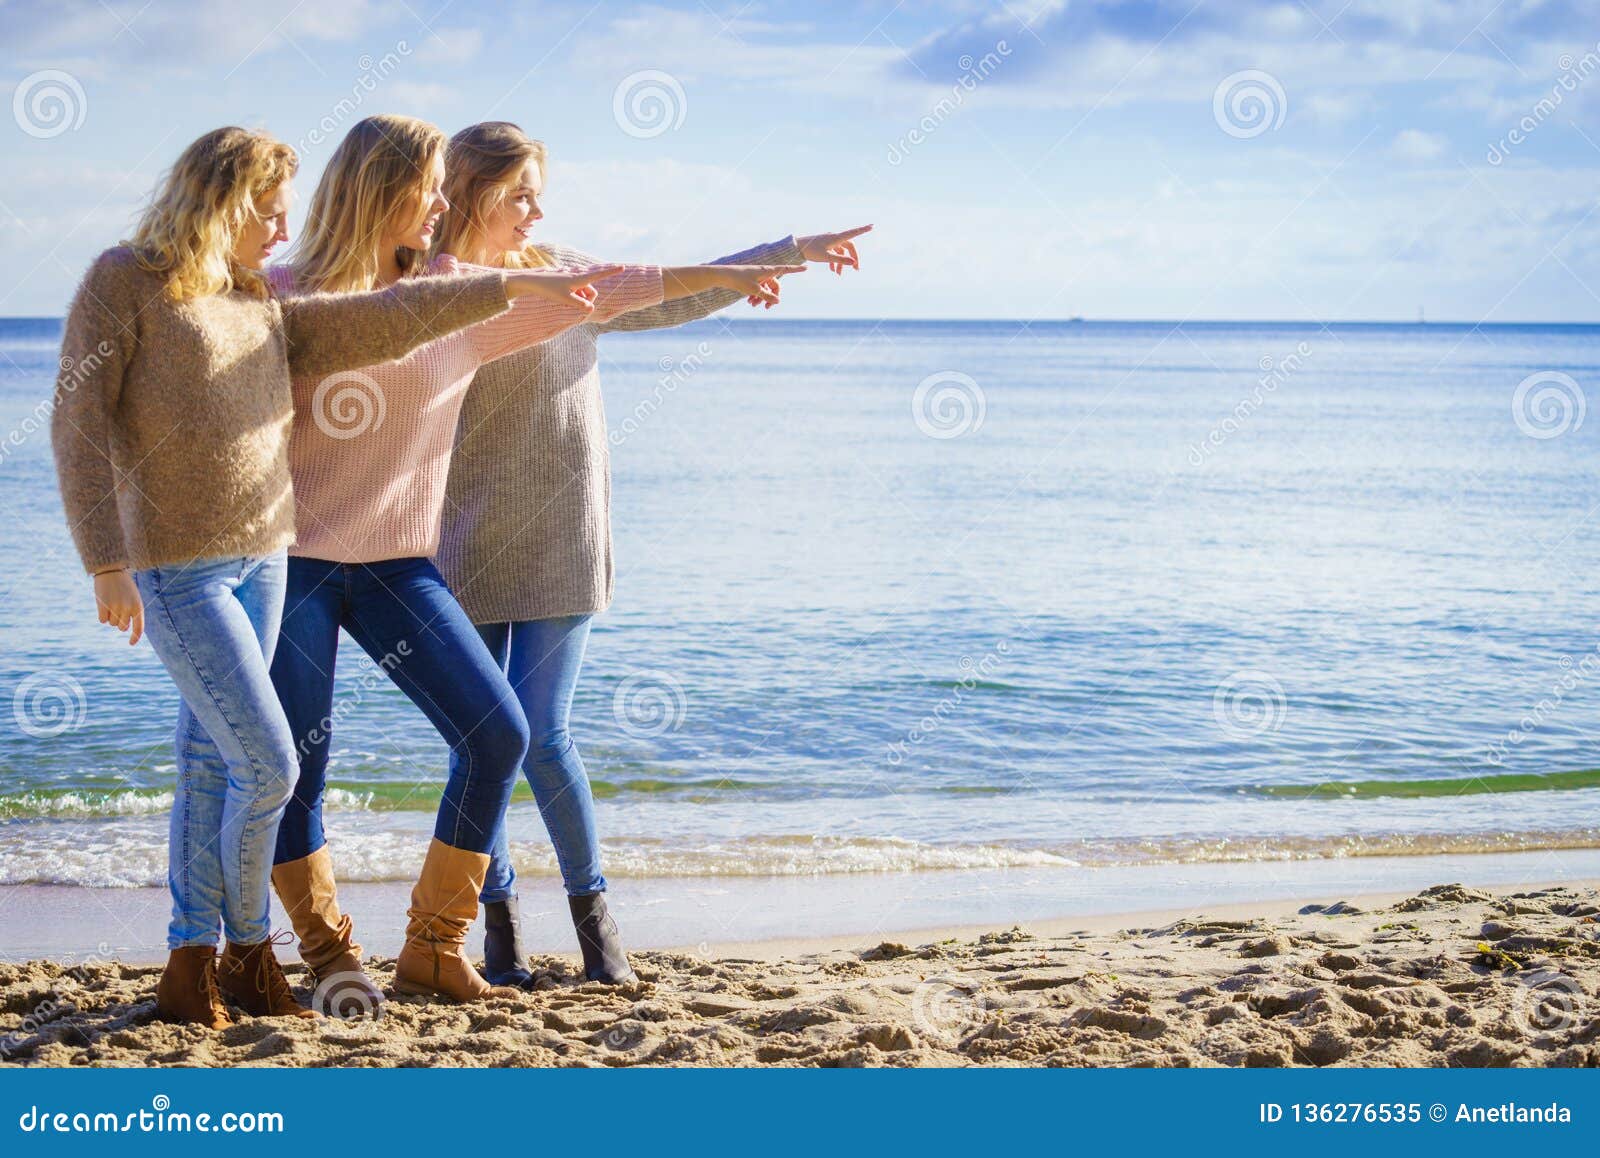 Three Fashionable Models Pointing Outdoor Stock Image - Image of ...